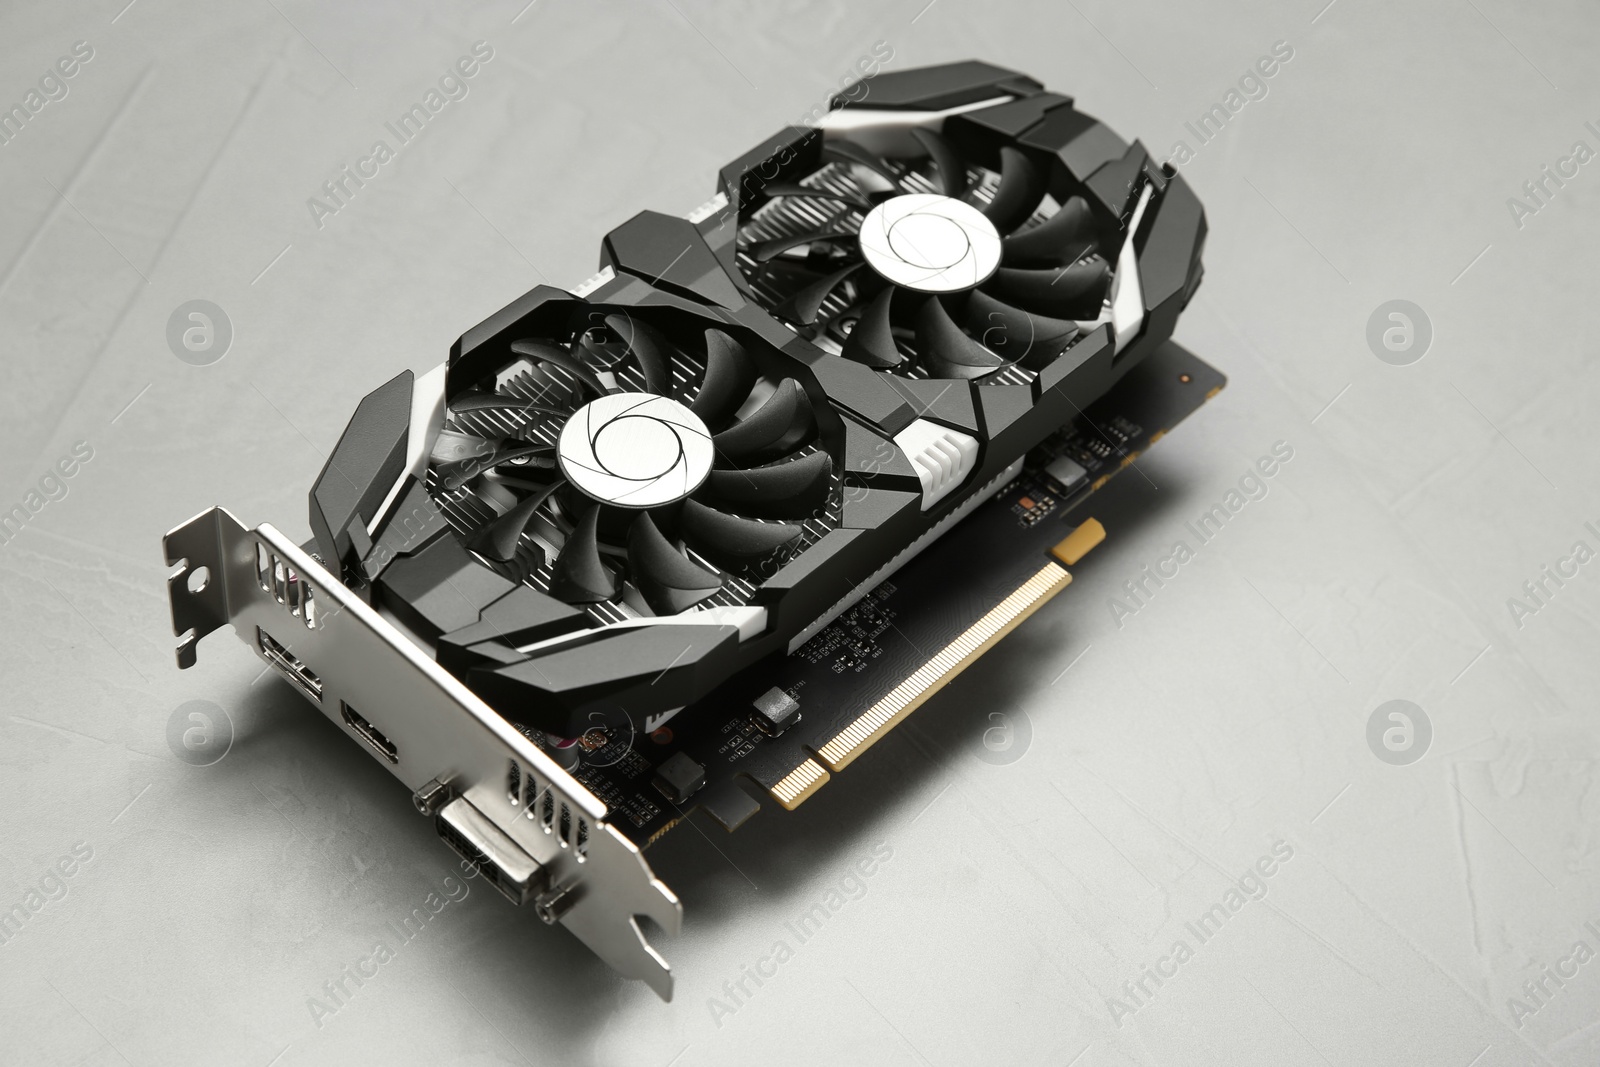 Photo of Computer graphics card on gray textured background